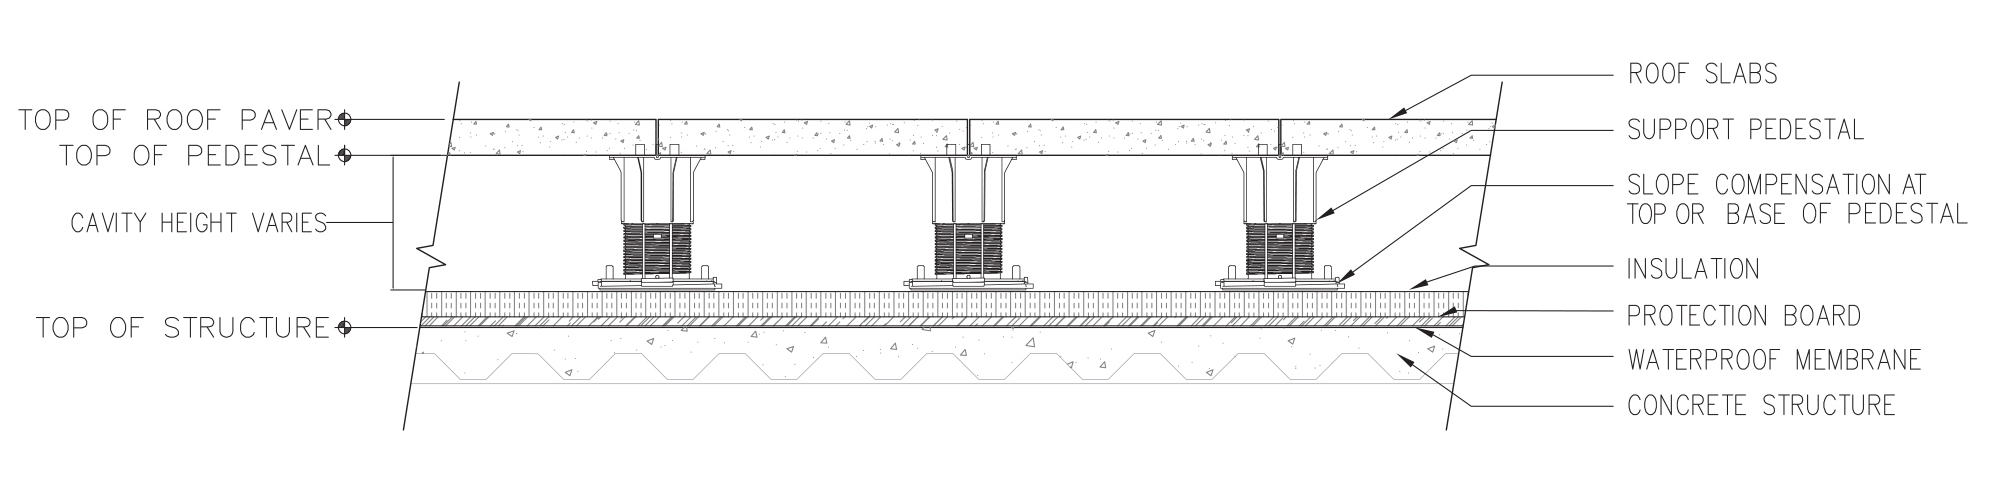 This schematic of a pedestal deck system shows the waterproof membrane over the concrete structure, a protection board, insulation, the pedestals, and the roof slab tiles or units